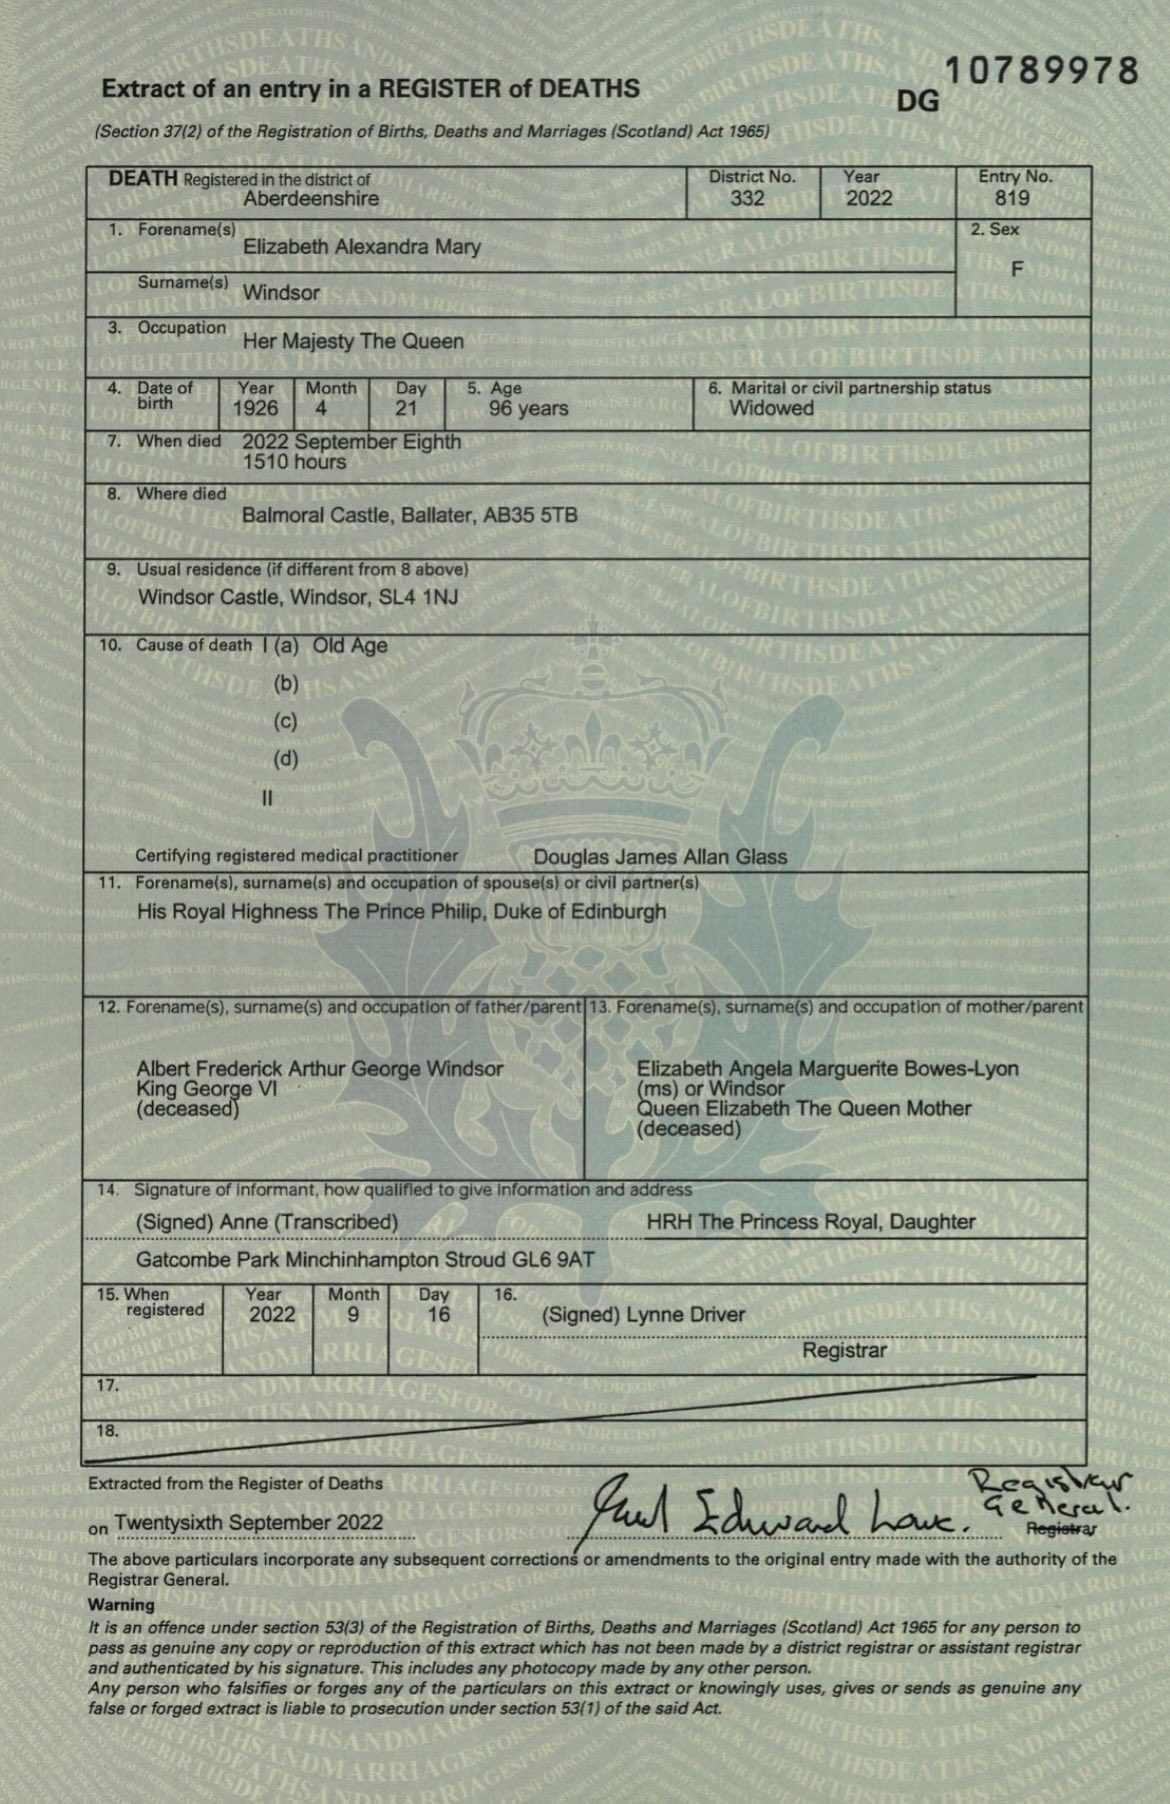 Photo of official registration of Queen Elizabeths passing released